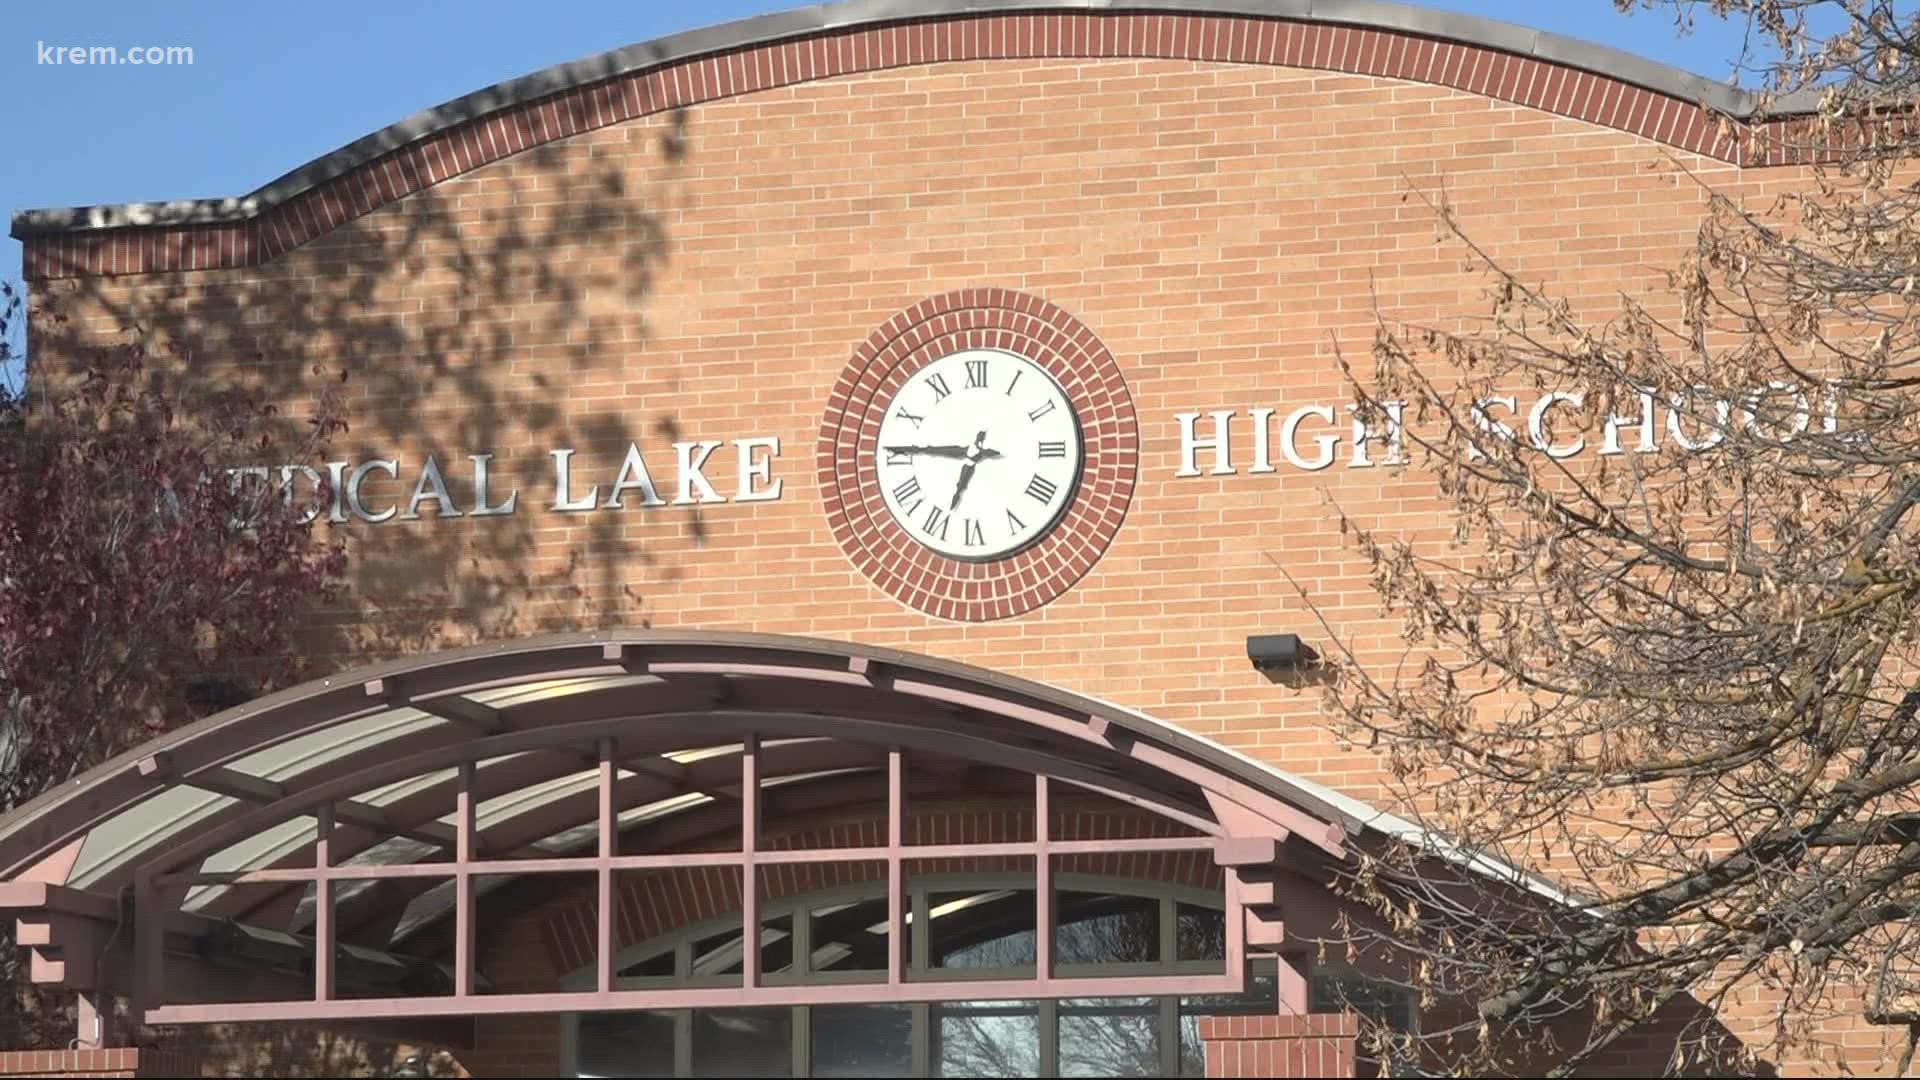 The suspect was arrested on Nov. 1 after another student reported Snapchat messages containing bomb threats to a Medical Lake School District Resource Deputy.